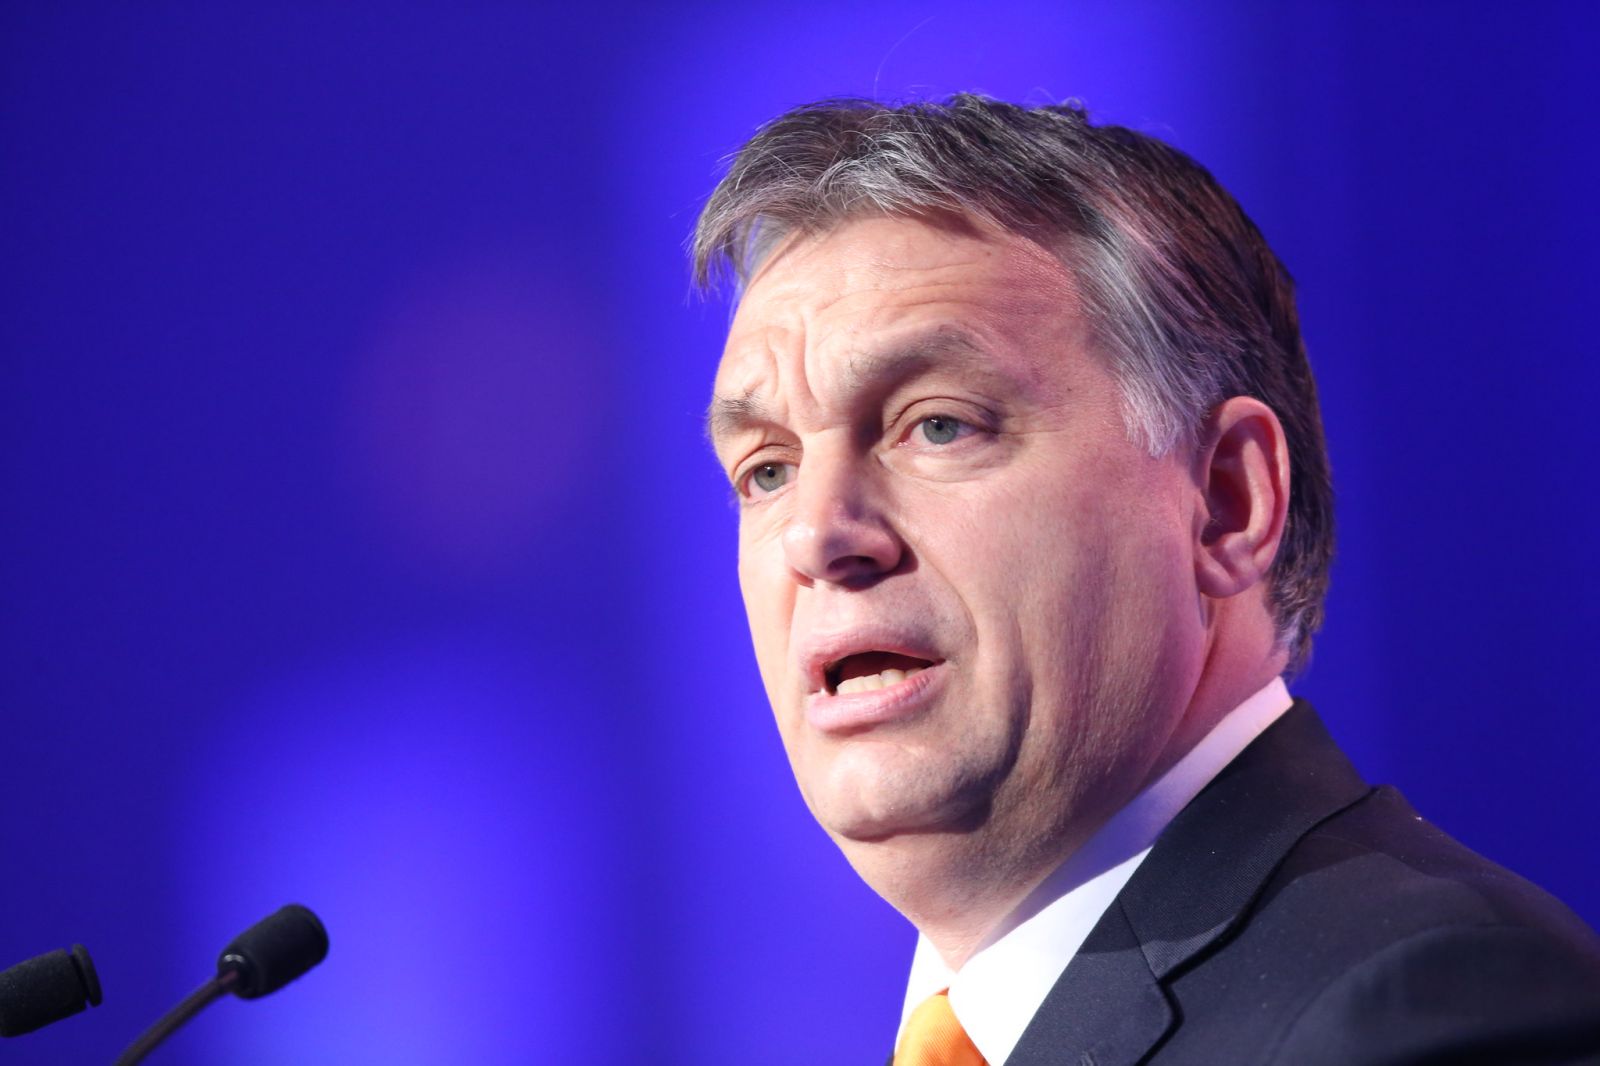 Orbán's Handling of the Coronavirus Shows How Populists Exercise Power